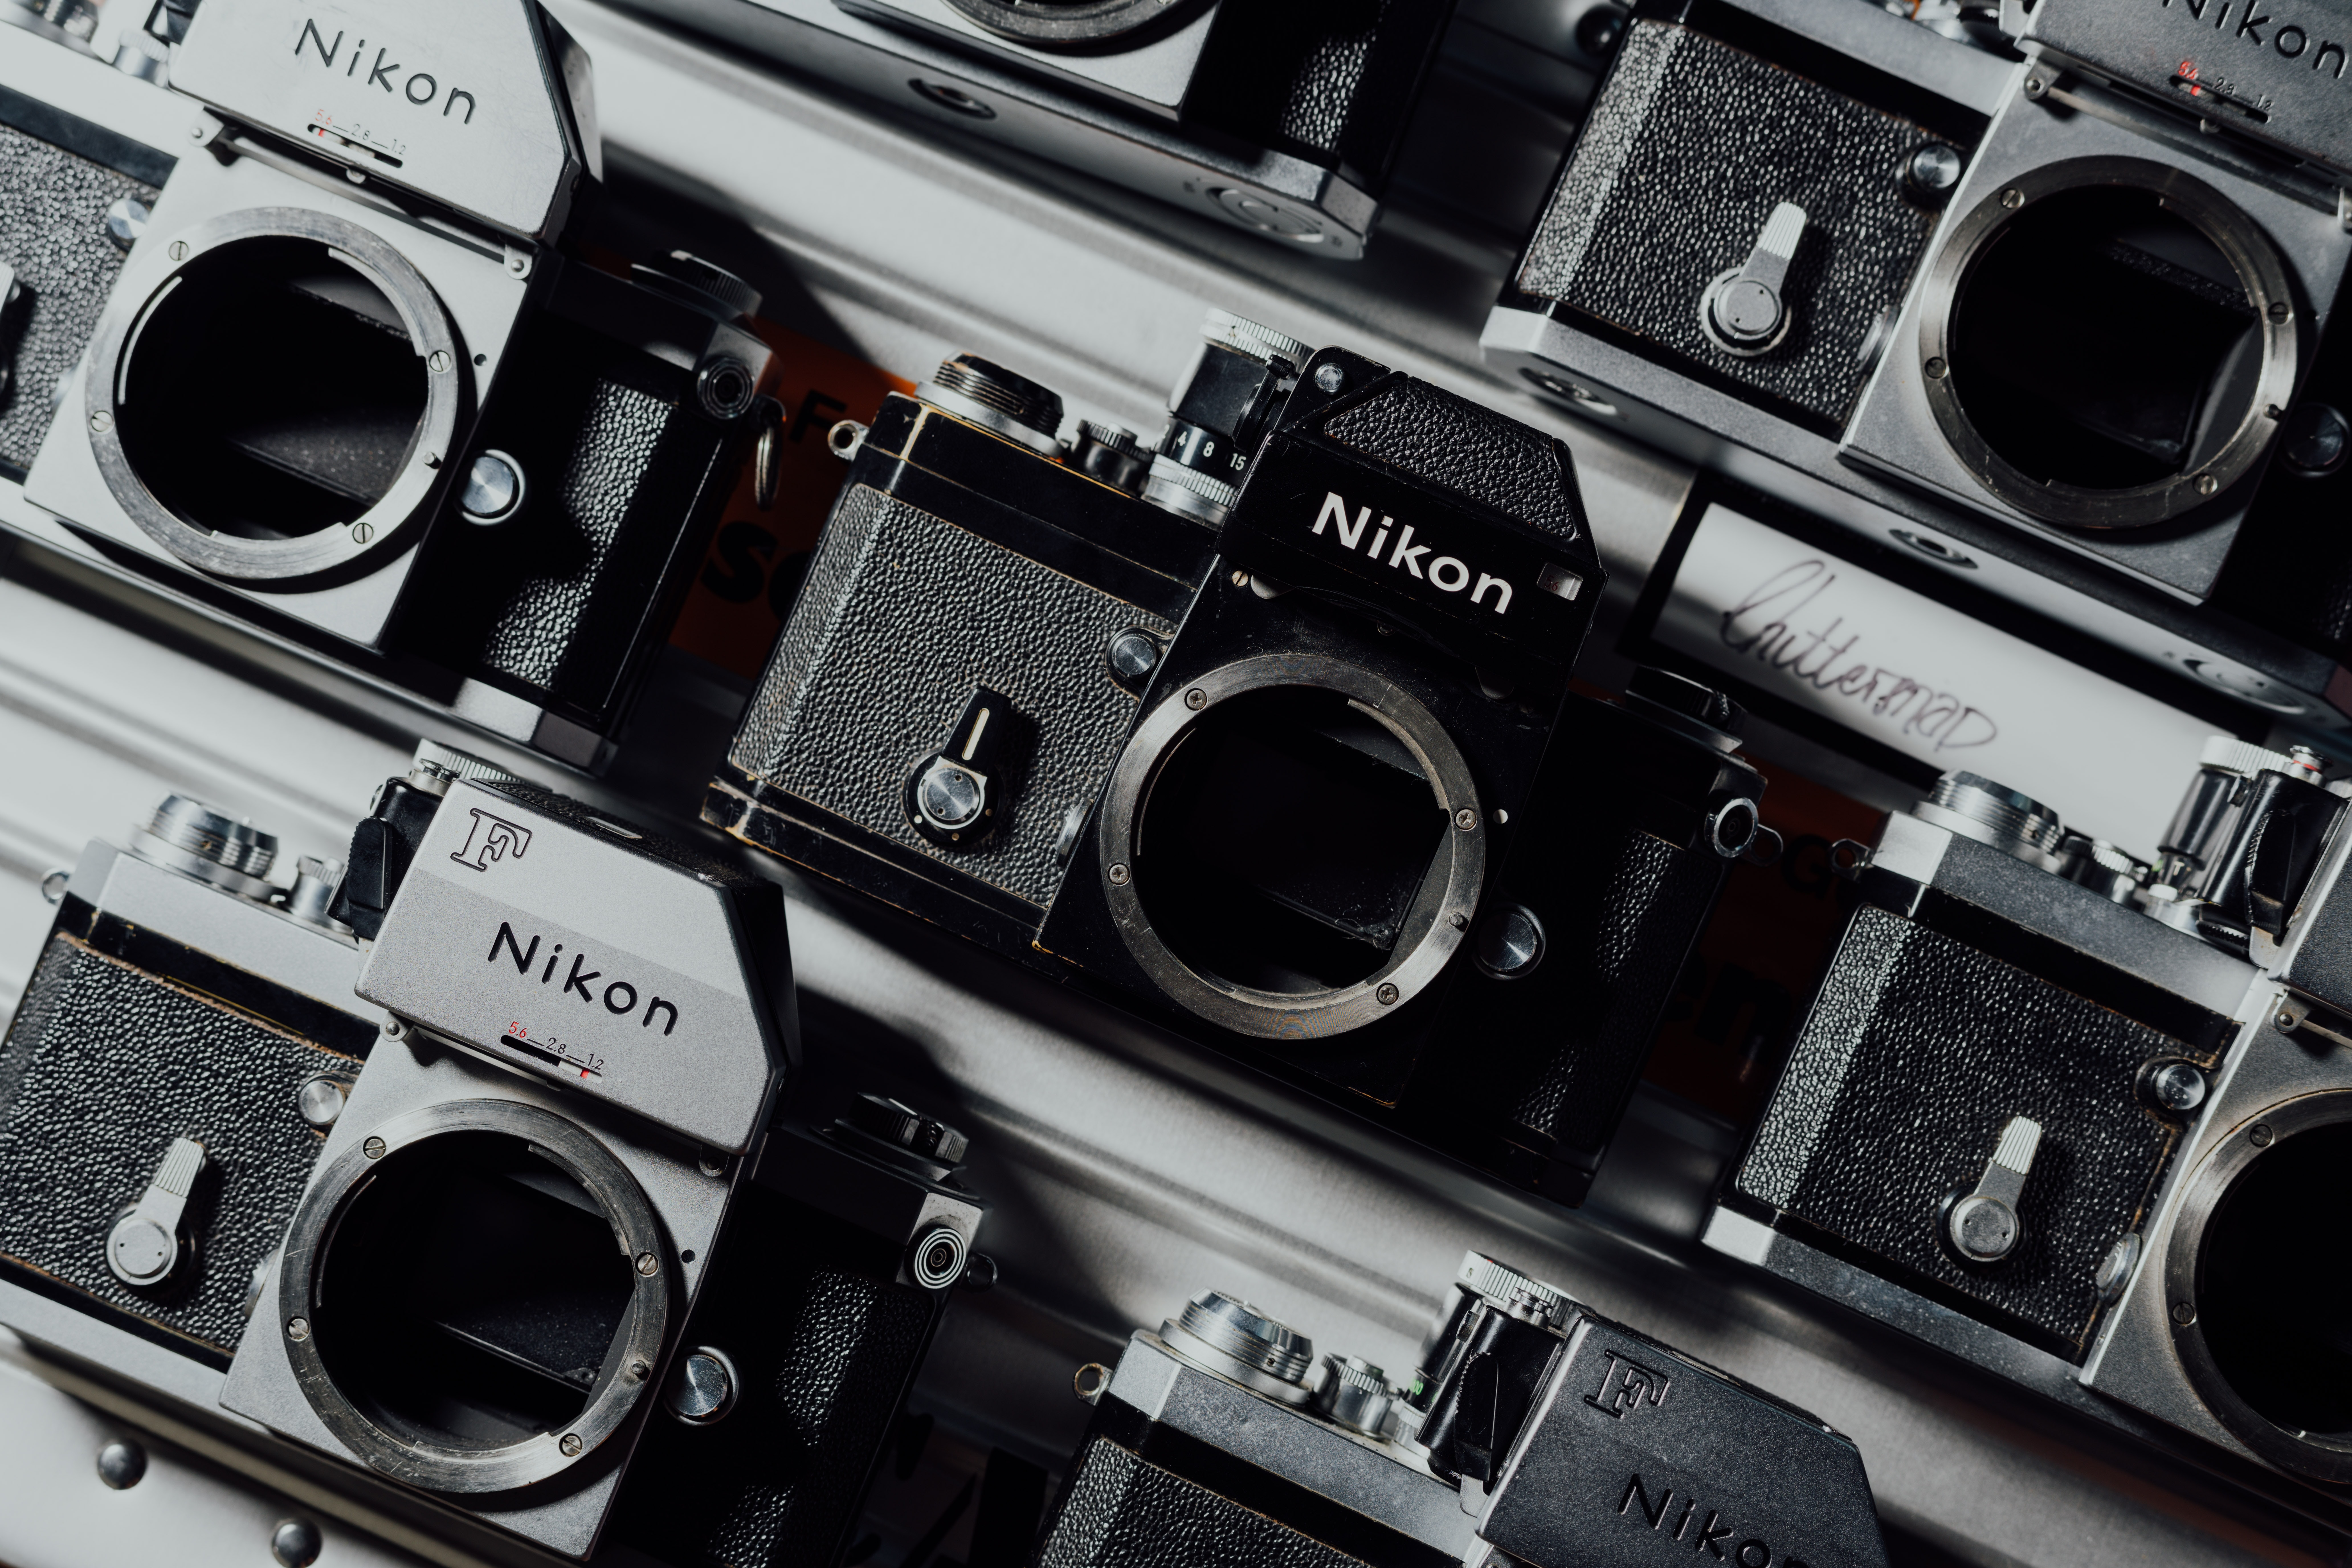 Nikon Camera is recommended for film photographers